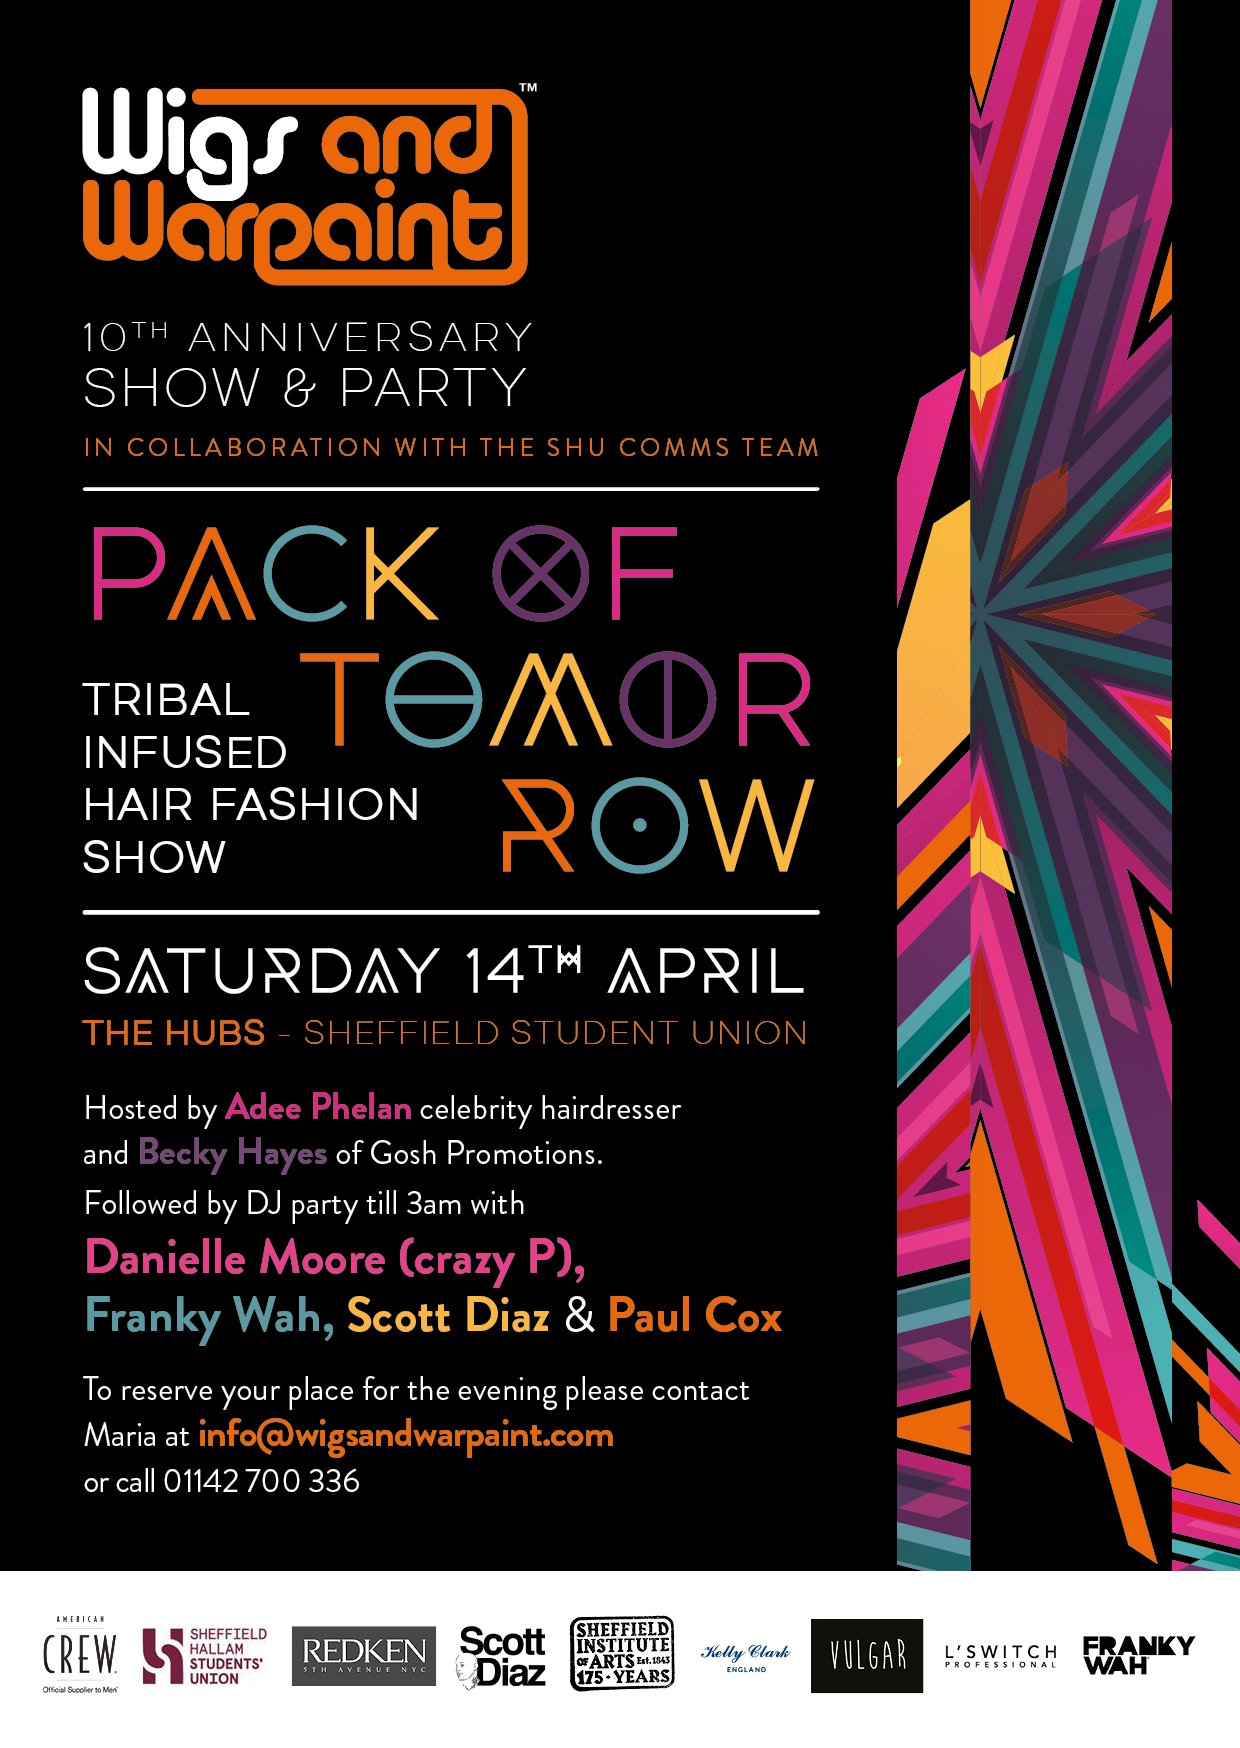 Wigs & Warpaints 10th Anniversary - Join Us At Our Catwalk Show & Party